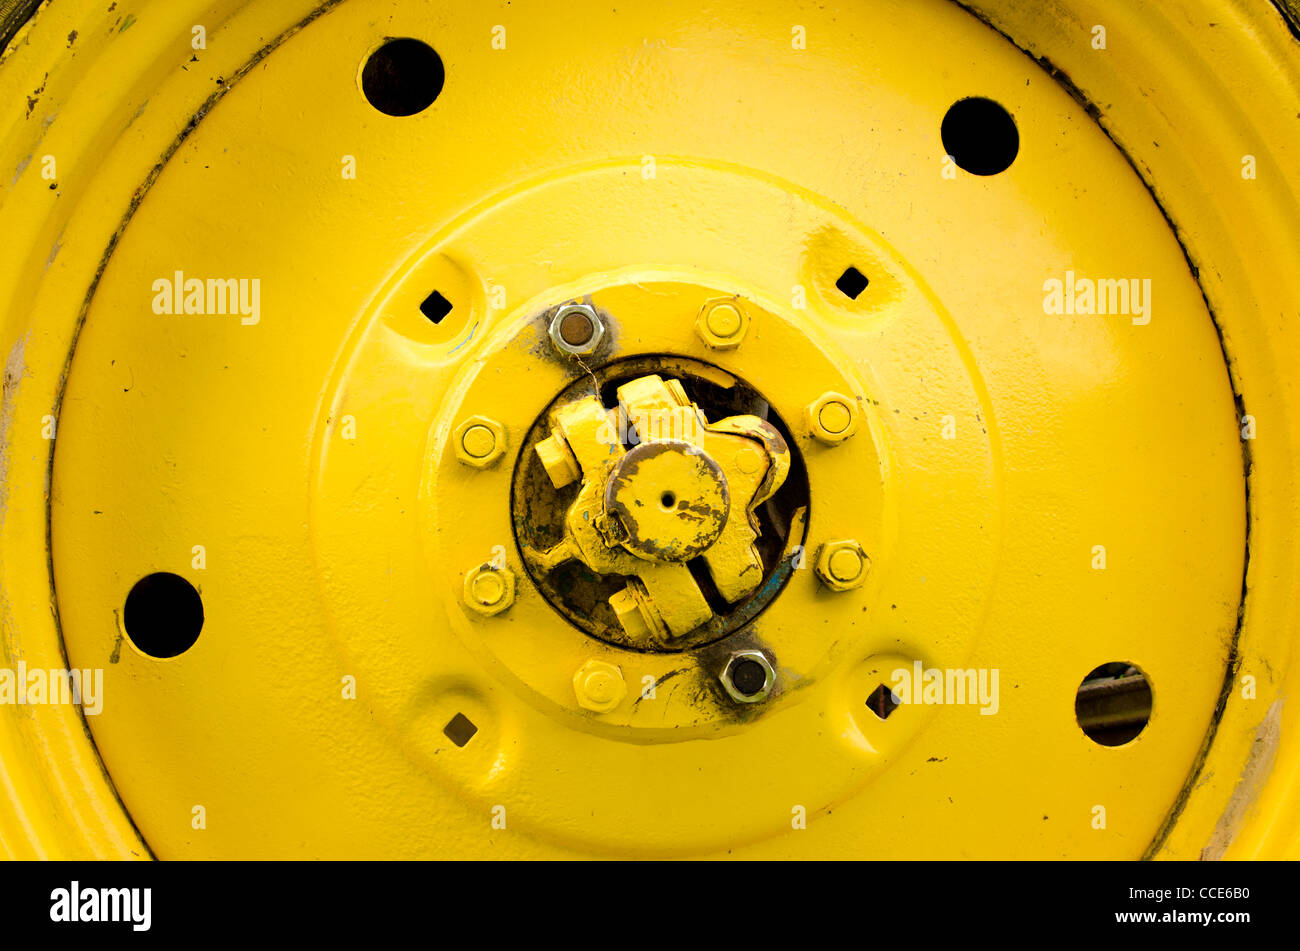 Yellow tractor wheel closeup details bolts nuts holes Stock Photo